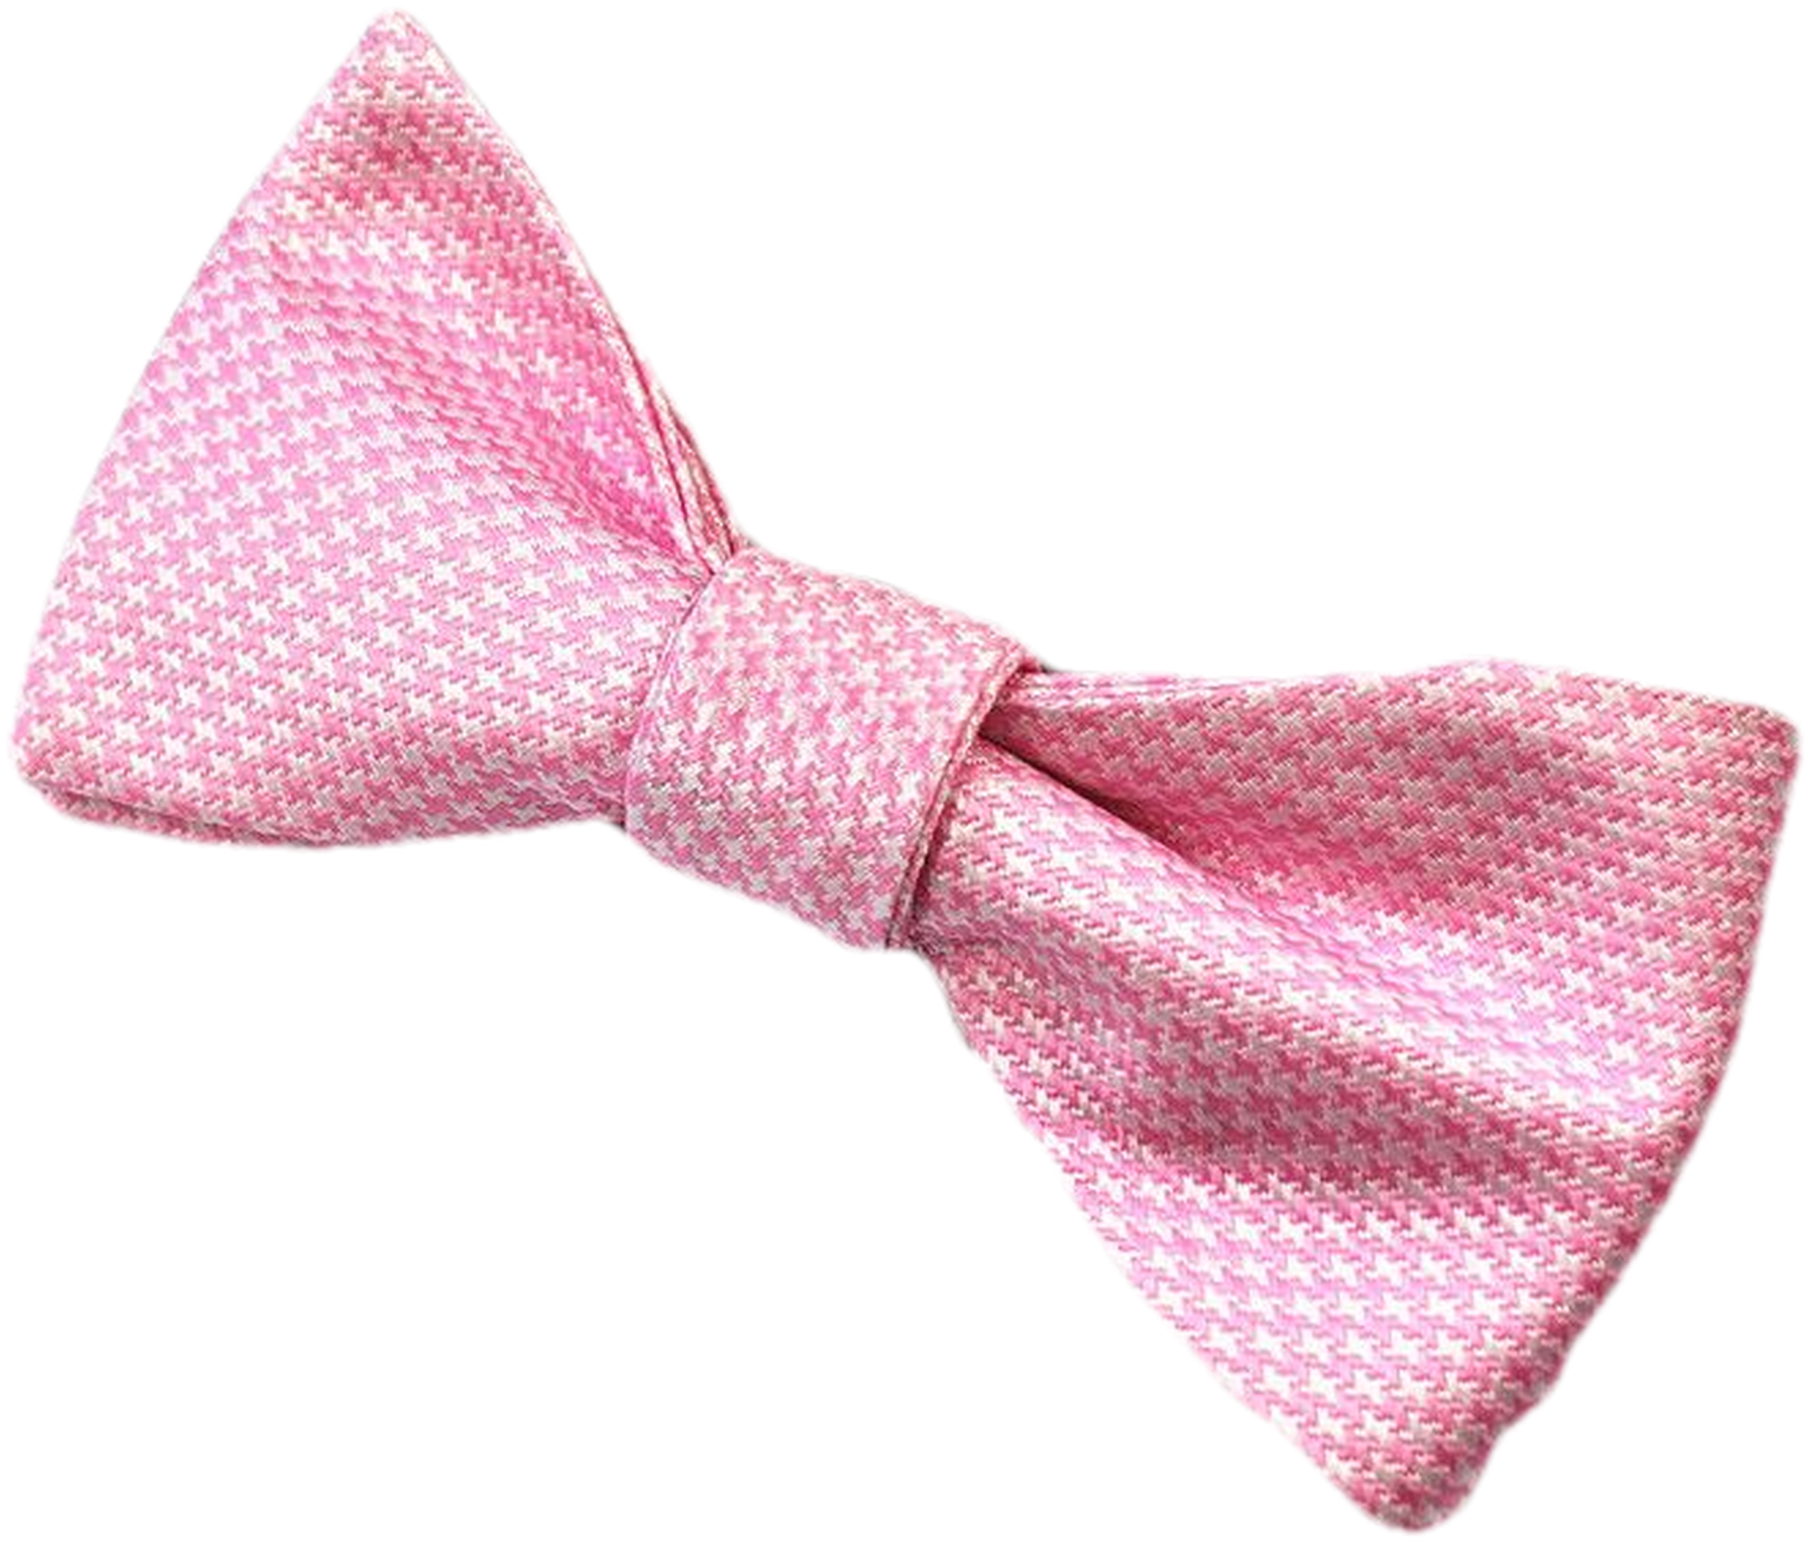 A Pink Bow Tie On A Black Background